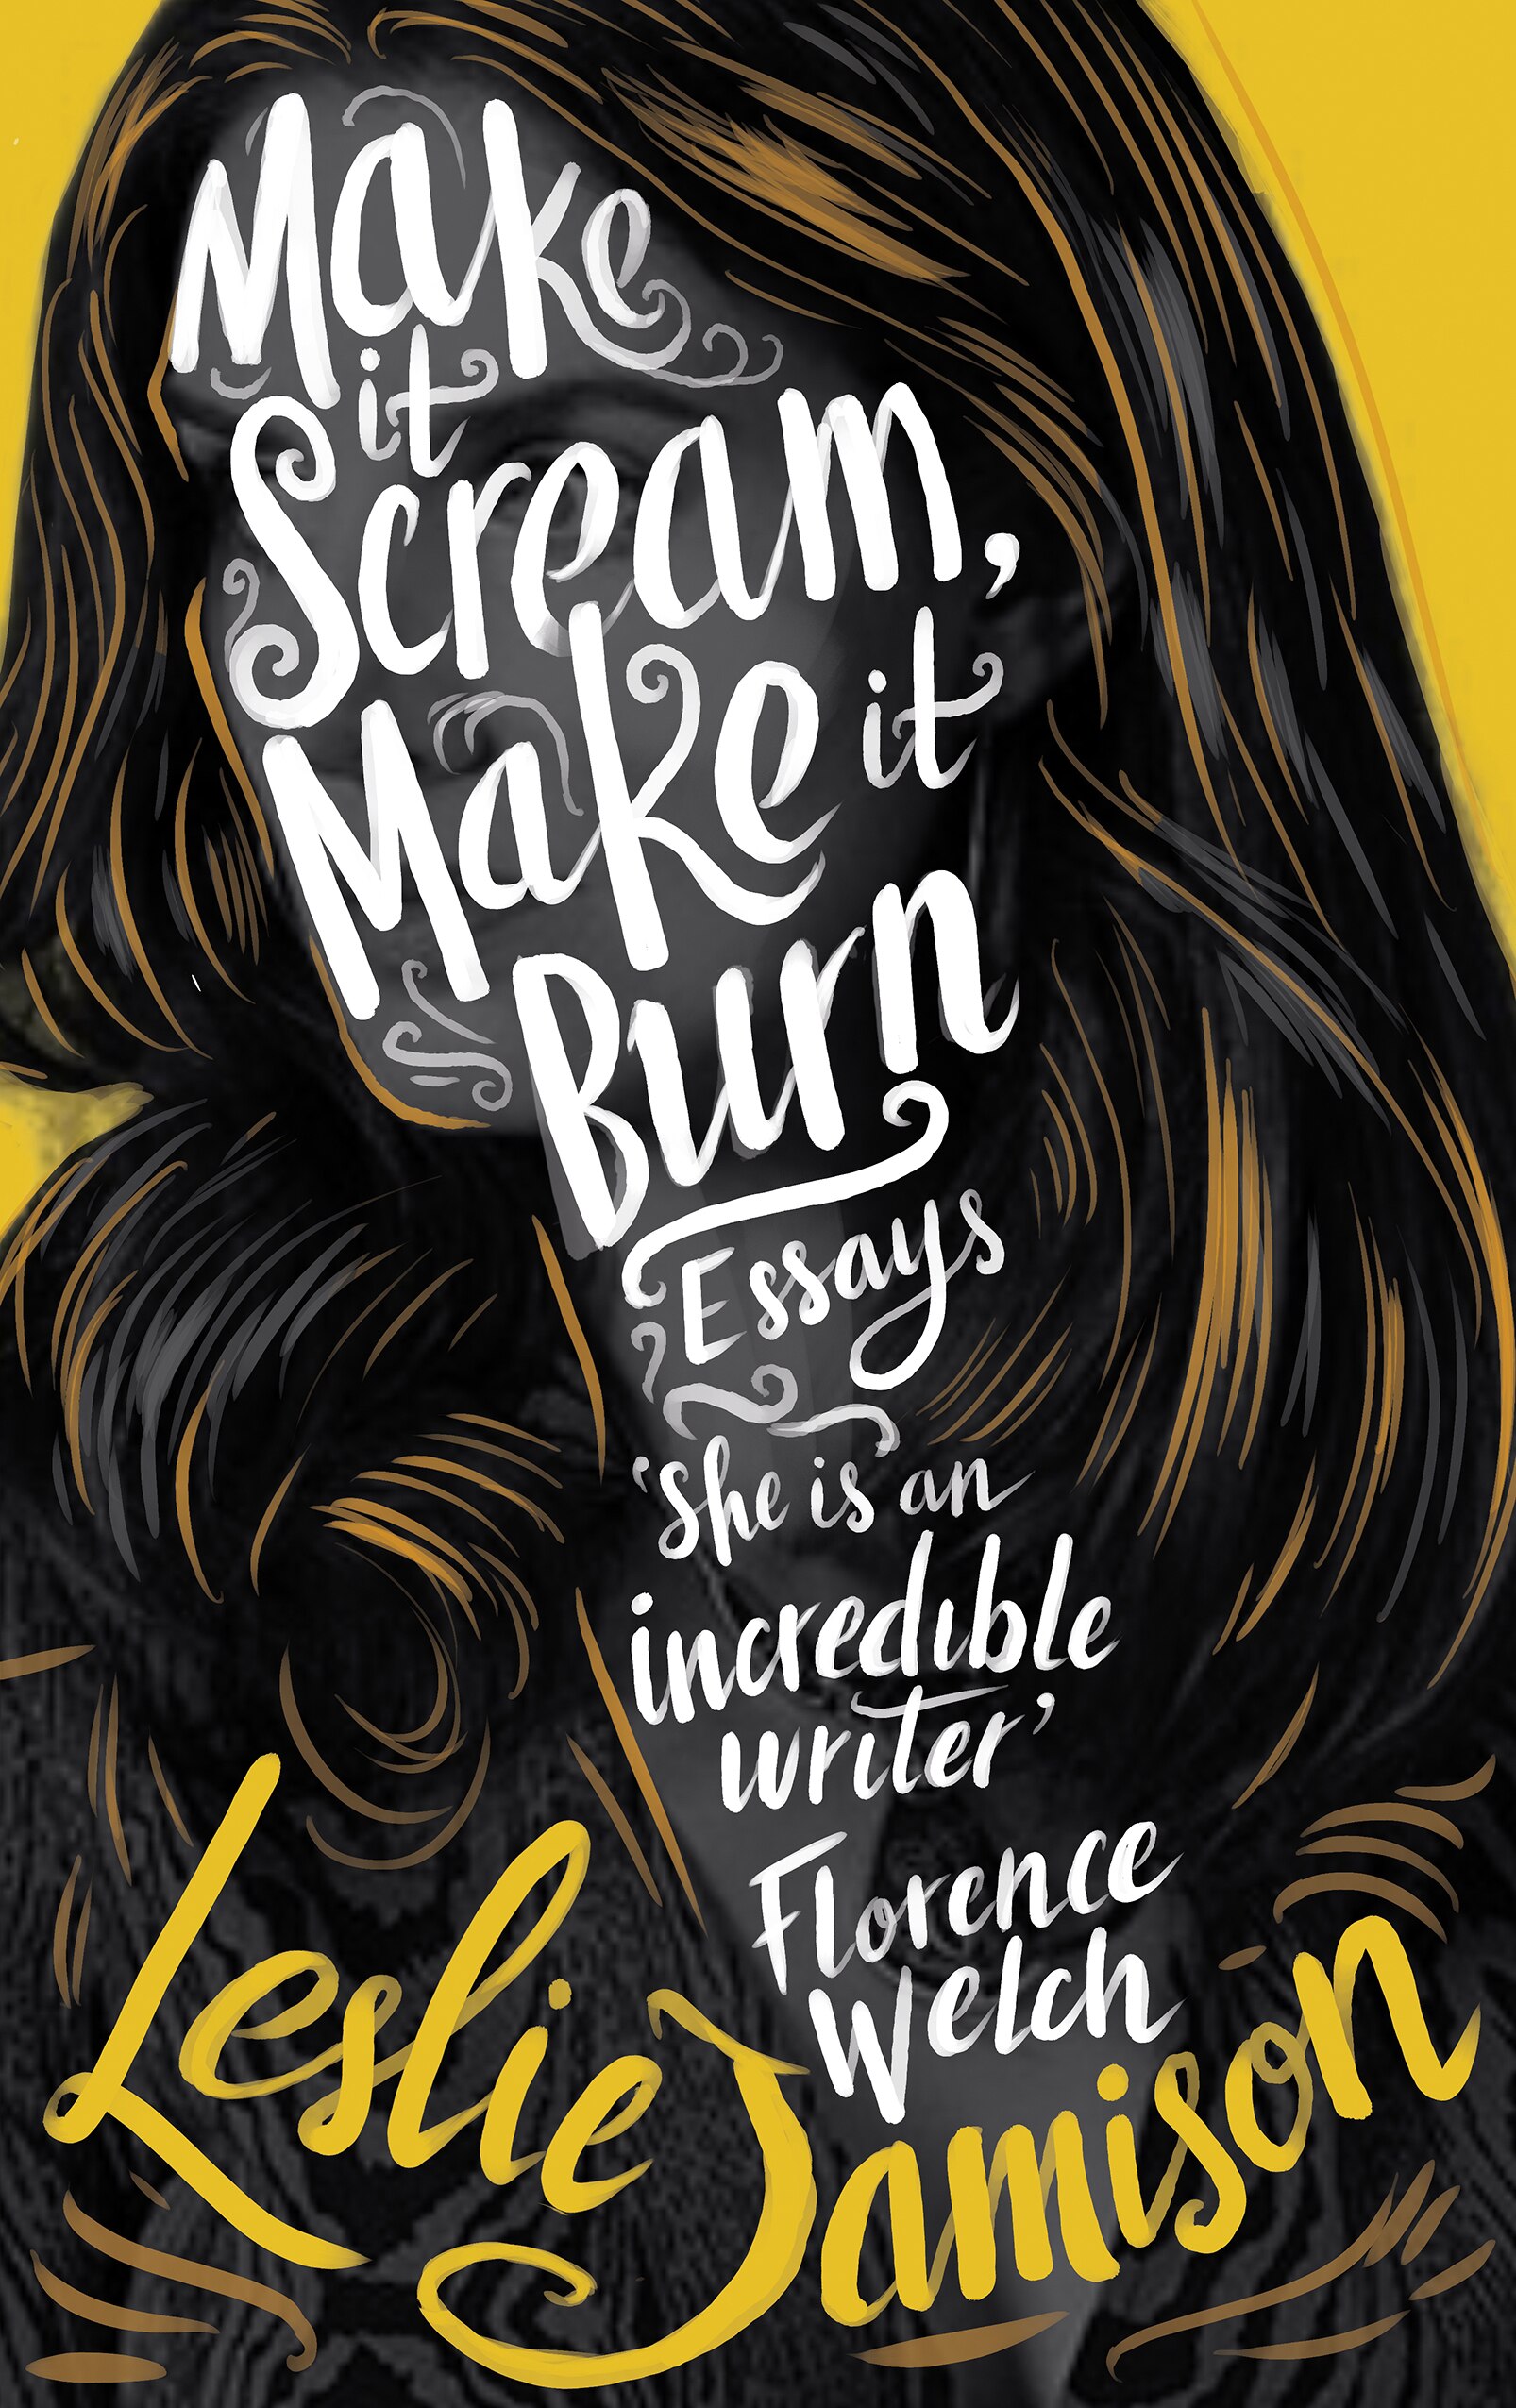 A book cover for Make It Scream, Make It Burn by Leslie Jamison. It is yellow and features a drawing of a brown-haired woman.